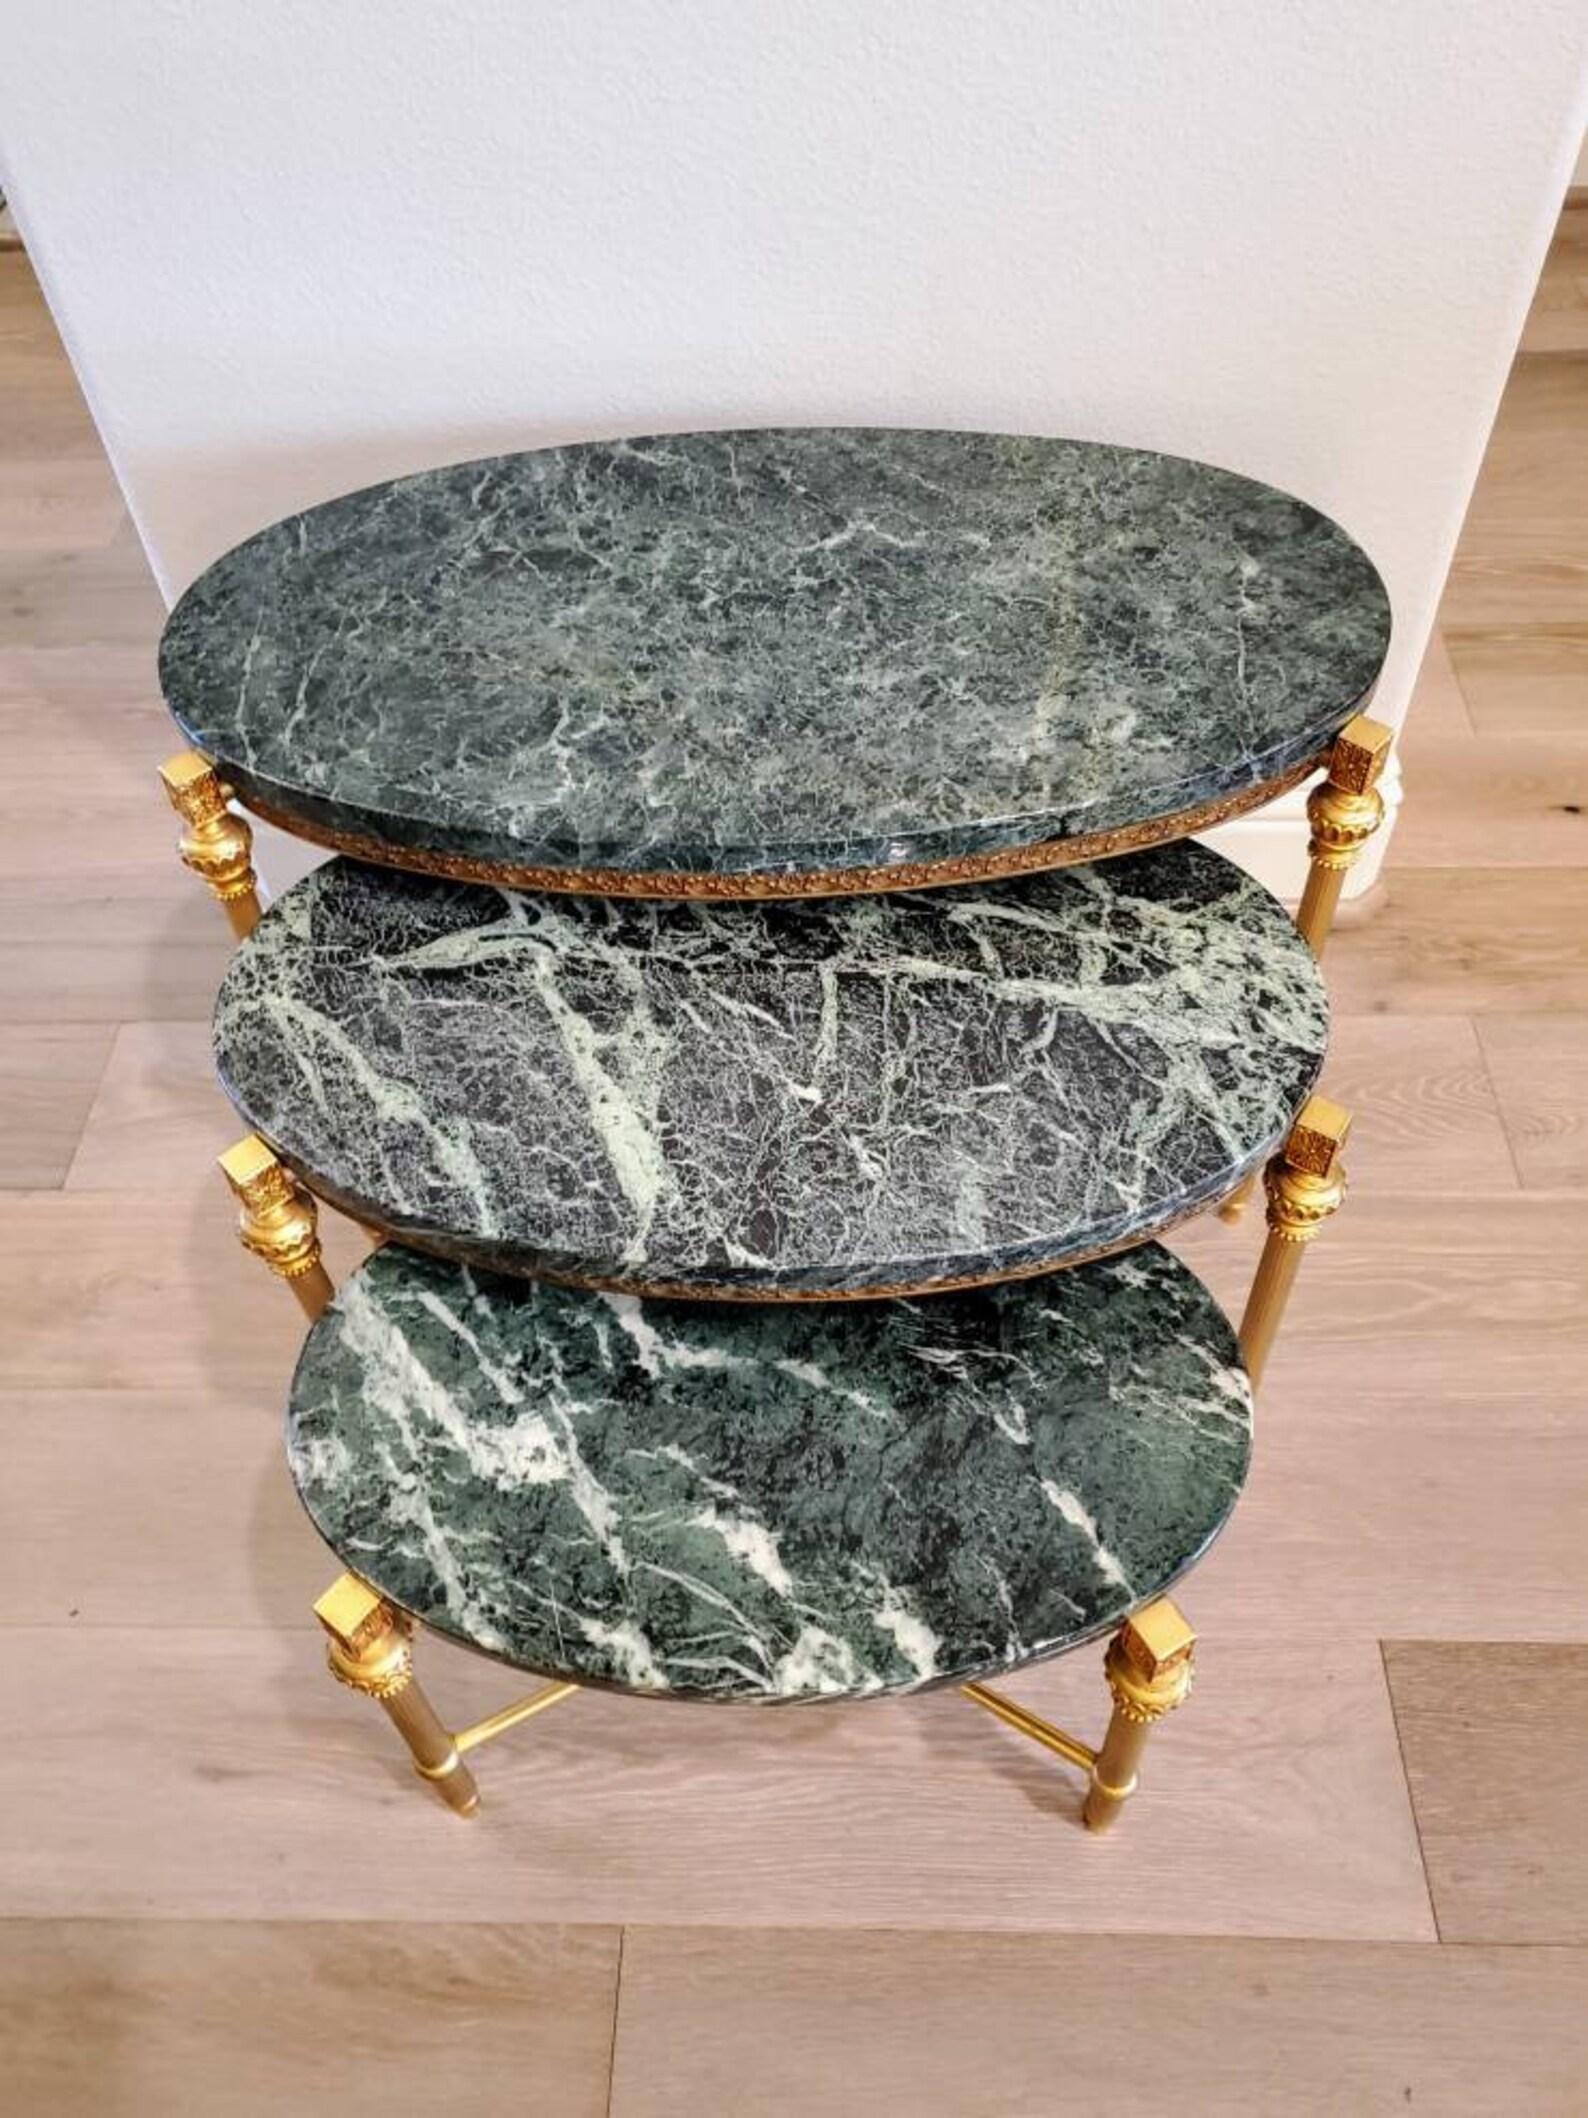 A magnificent set of three French mid 20th century gilded brass marble top nesting tables attributed to Maison Baguès for Parisian design firm Maison Jansen. 

Finished in luxurious Louis XVI taste, each table graduated in size, having a striking